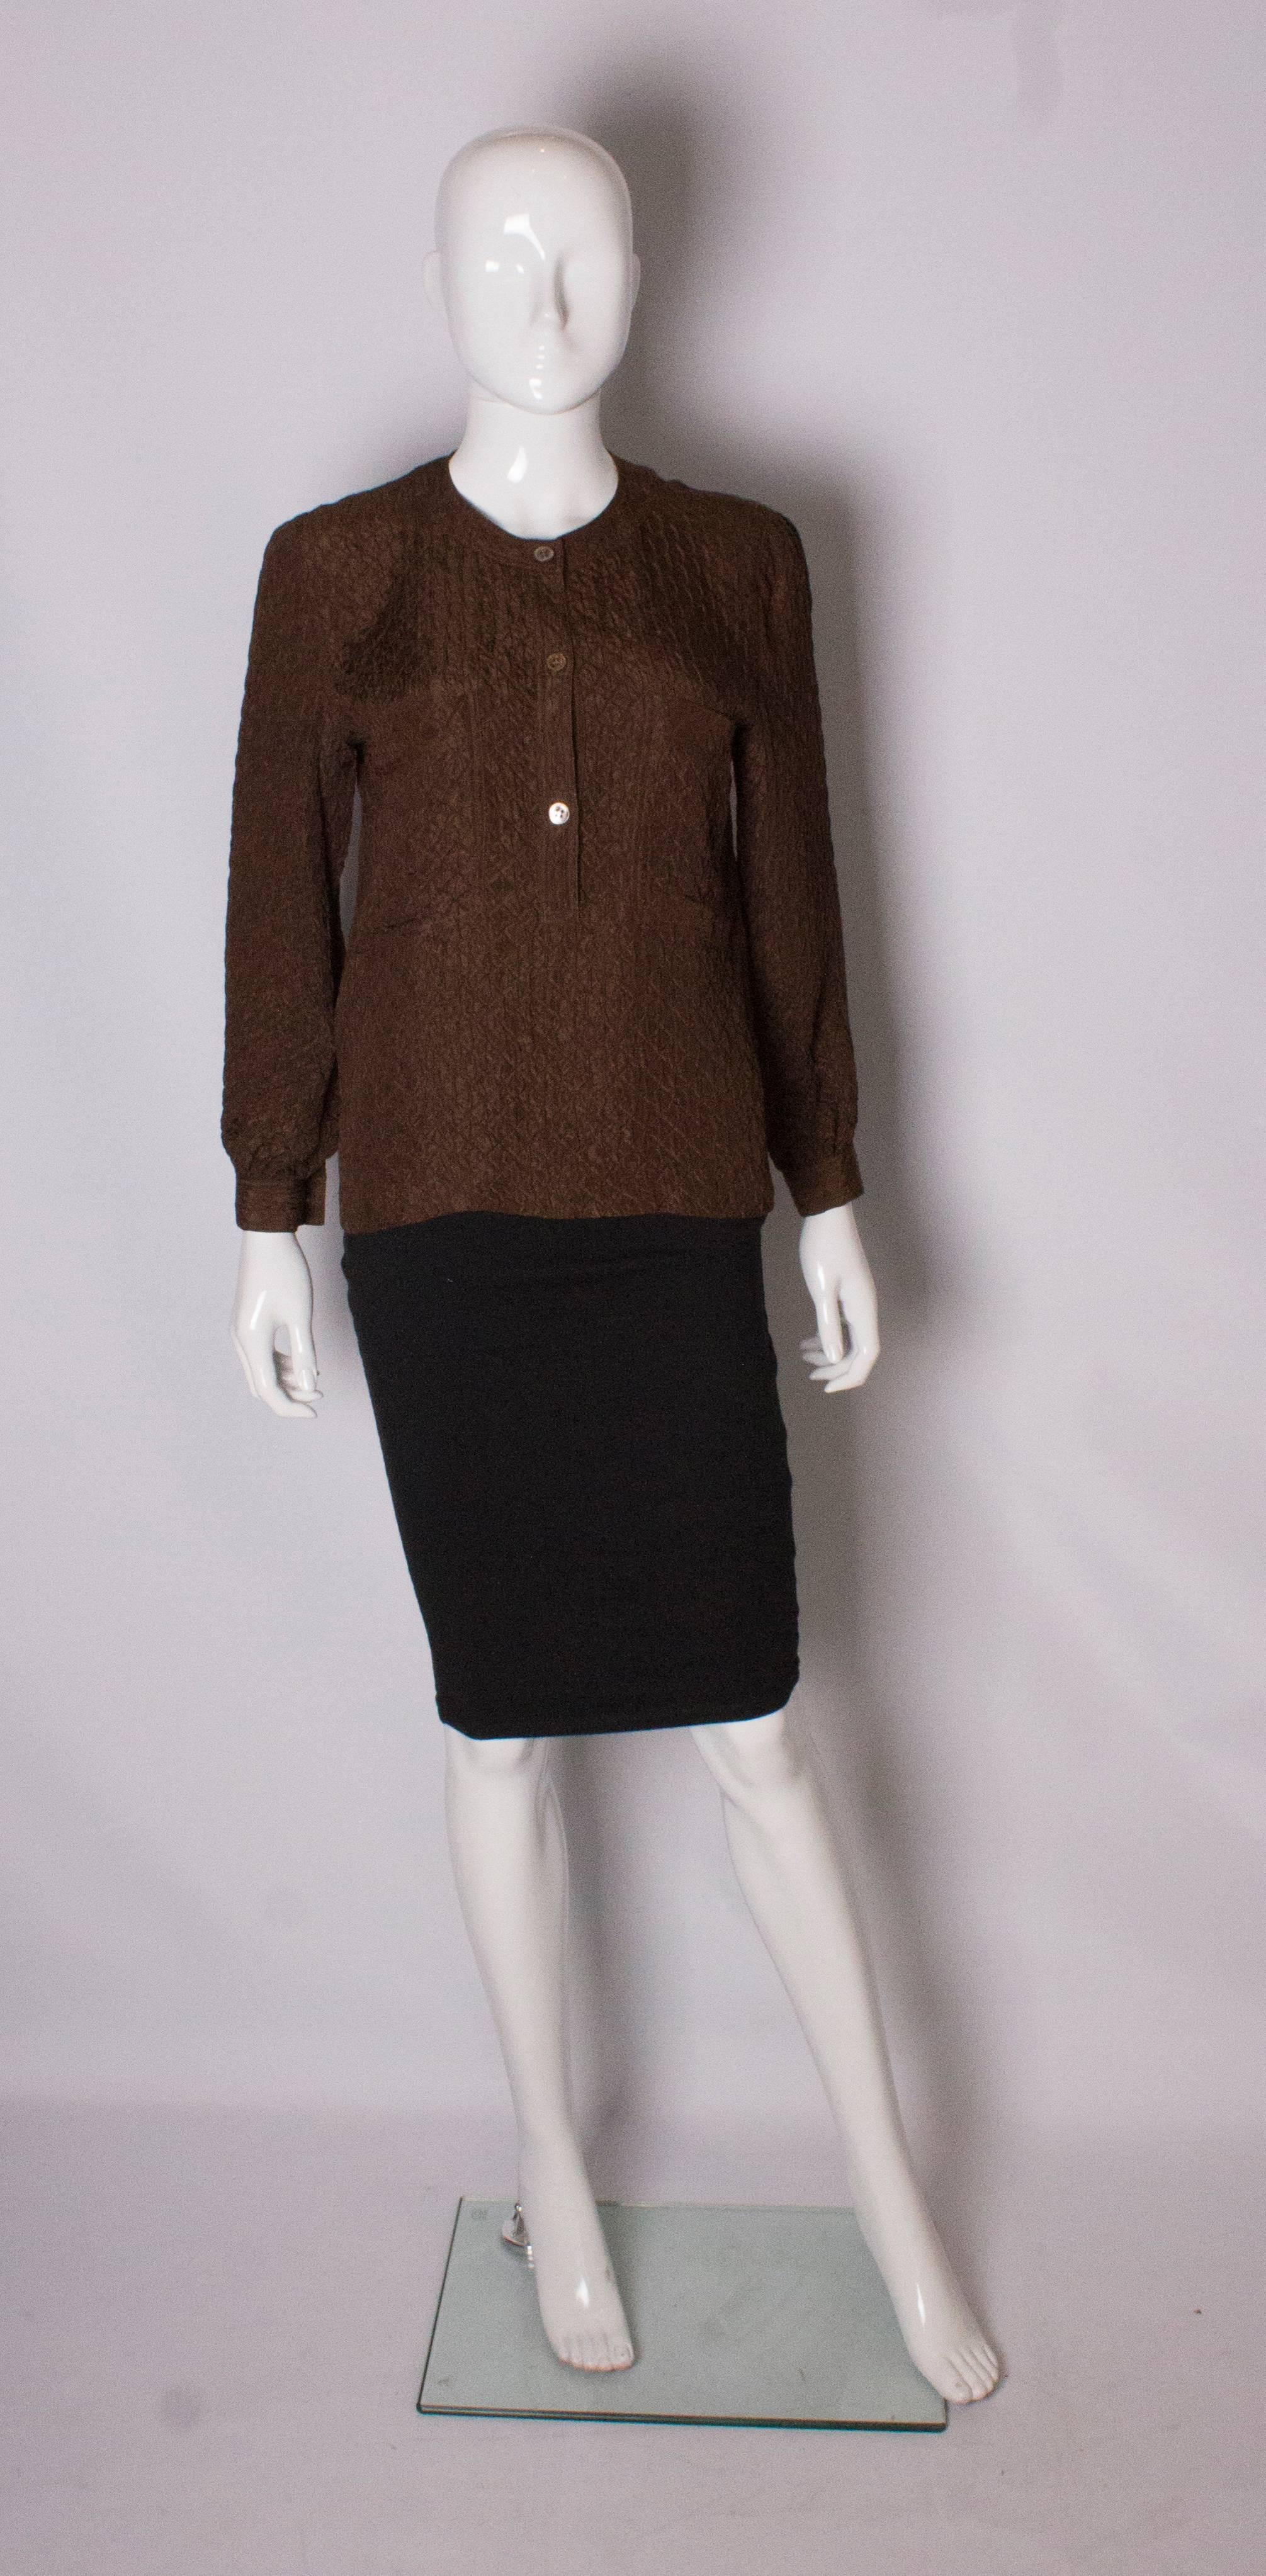 A chic top by Valentino, Miss V line. The top is in a brown quilted silk and has a v neckline with 3 button front opening and one button on the cuffs. It has two breast pockets.